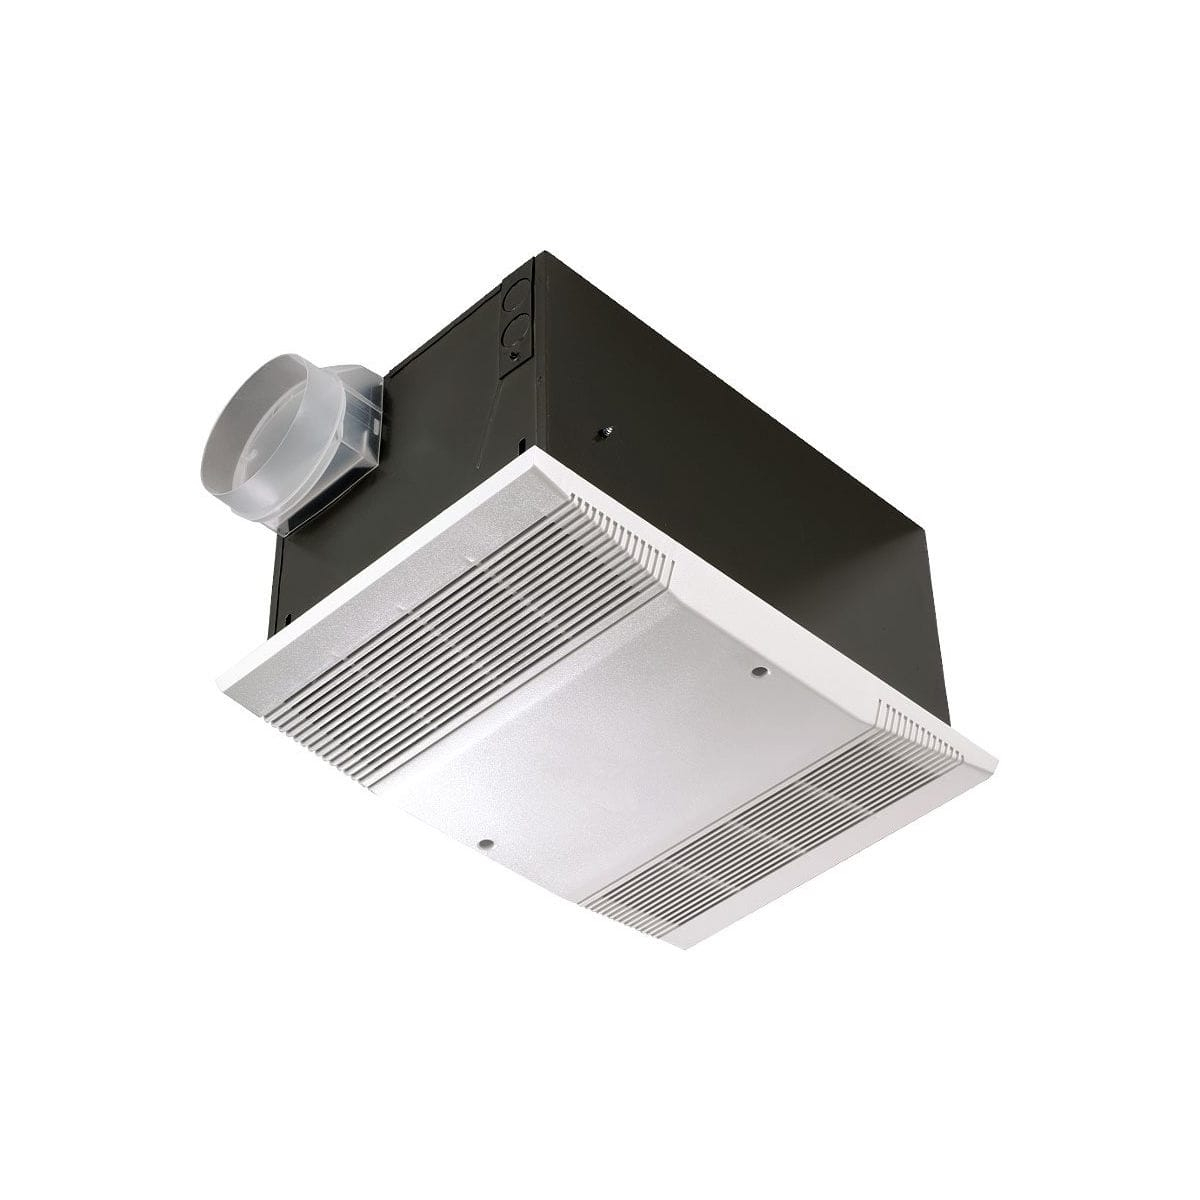 Nutone 9905 White 70 Cfm 4 Sone Ceiling Mounted Hvi pertaining to dimensions 1200 X 1200